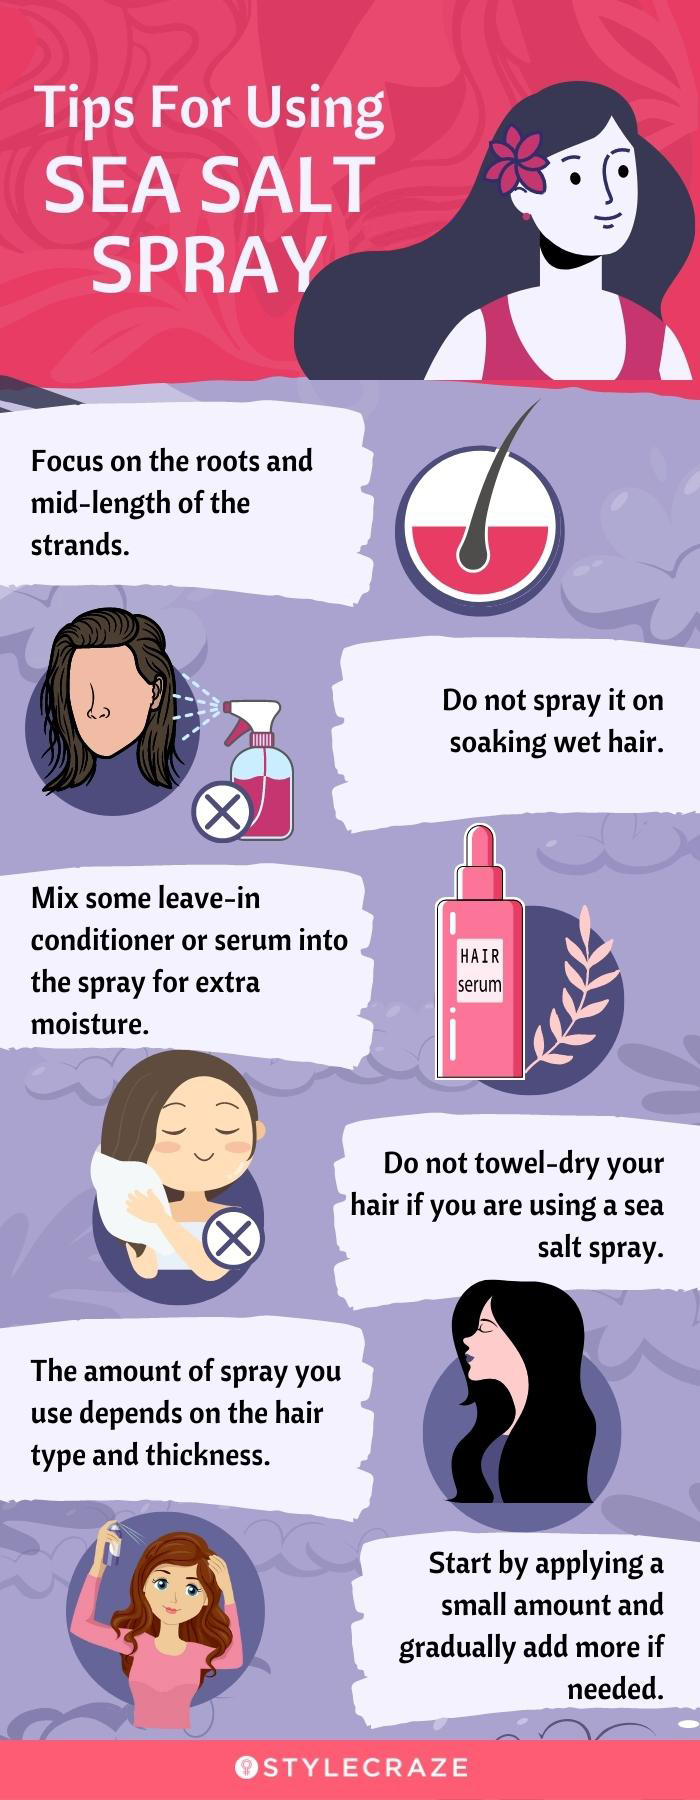 What Does Sea Salt Spray Do For Your Hair? - Mankind